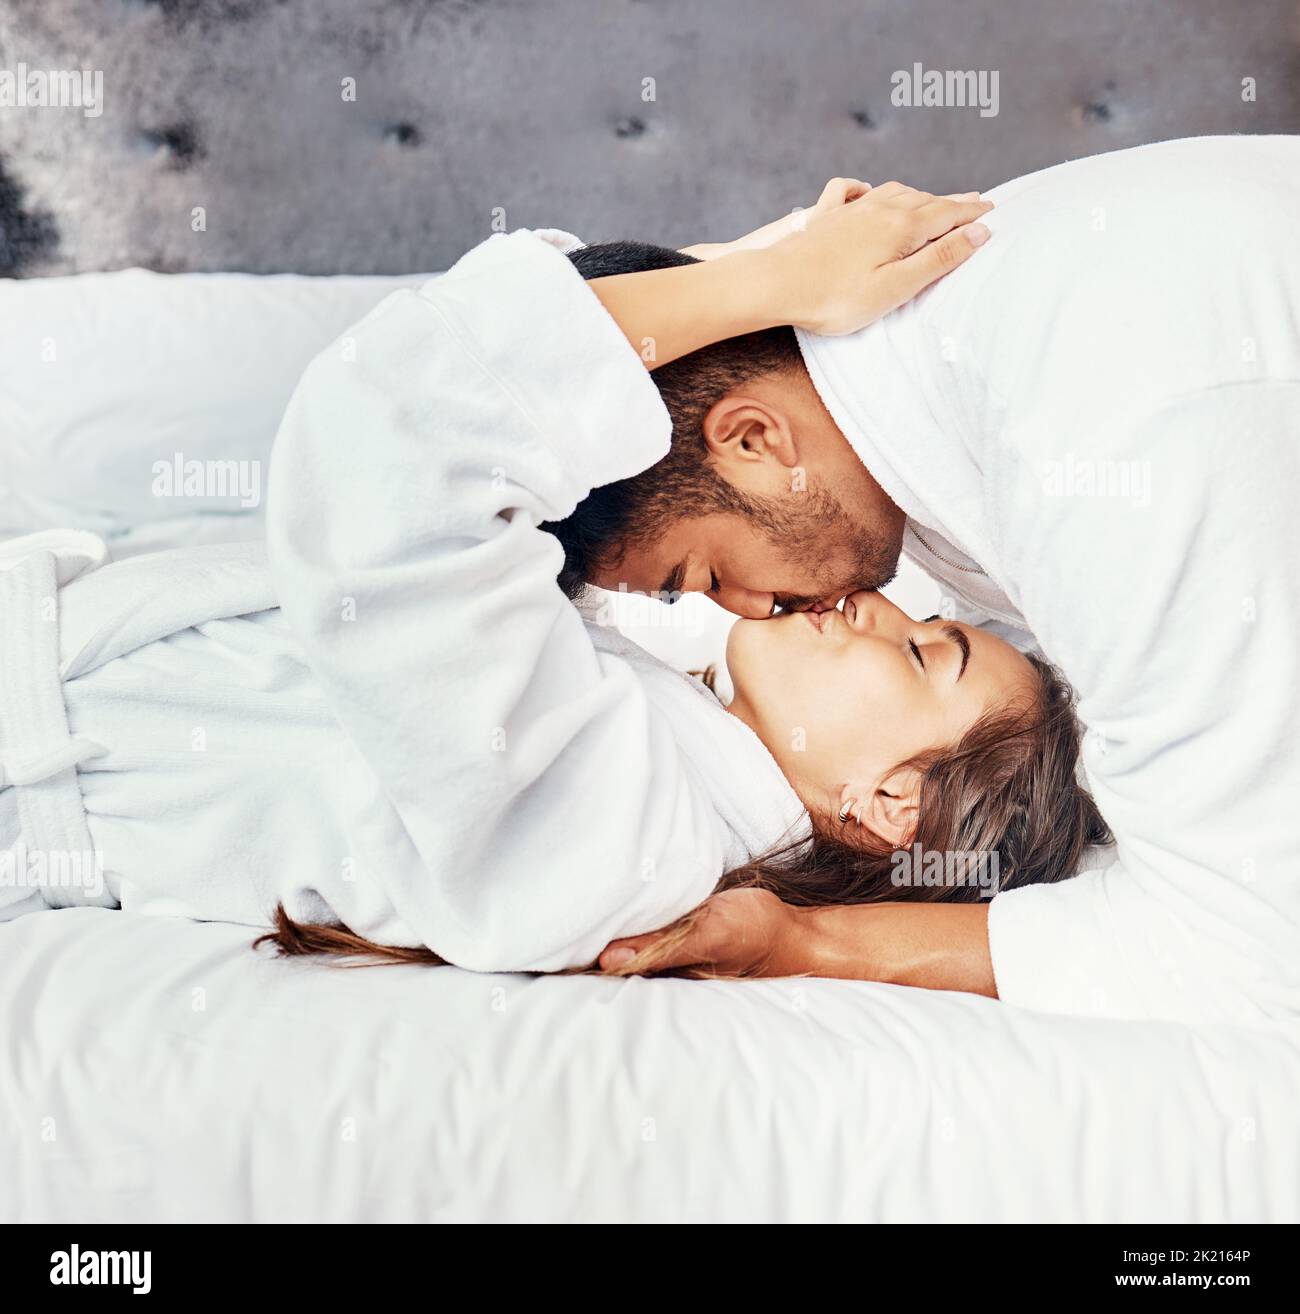 13 Popular Couples Sleeping Positions and What They Mean